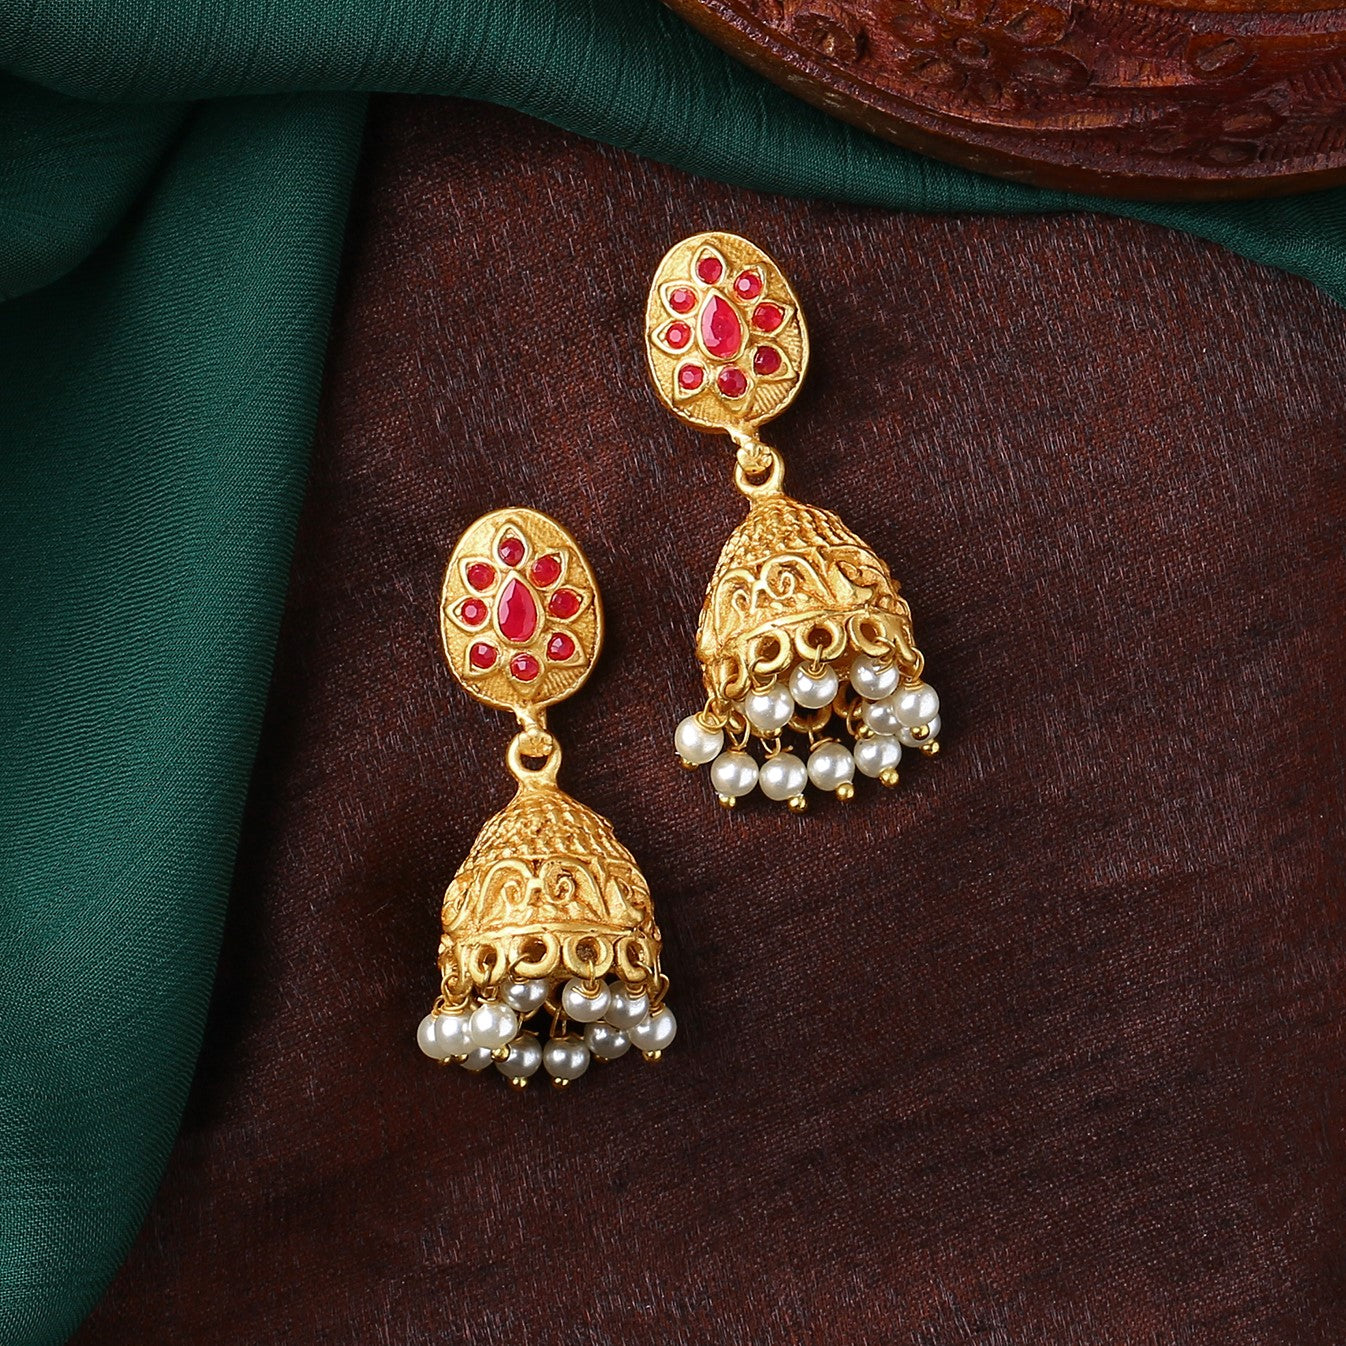 Estele Gold Plated Stunning Floral Designer Jhumki Earrings with Pearls for Women